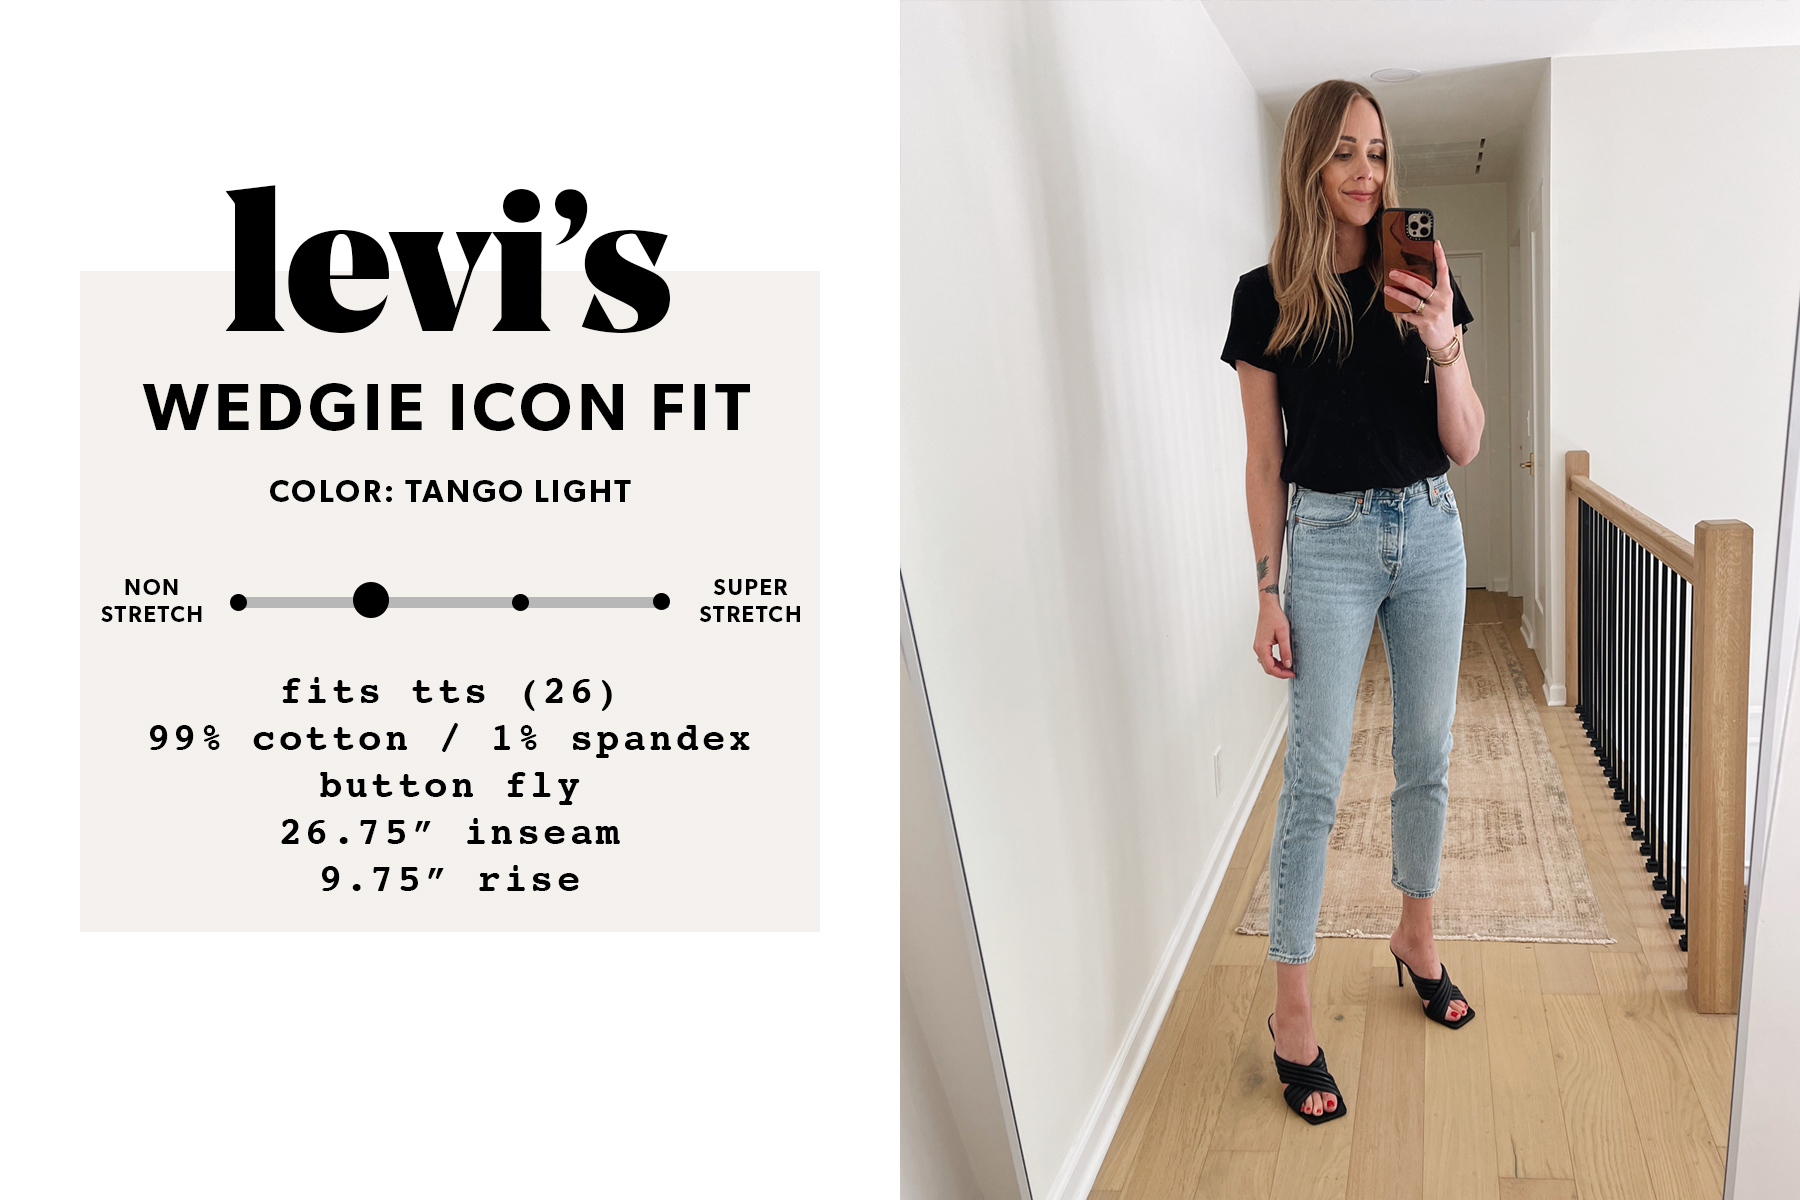 Permeability mercy I was surprised The Complete Guide to Buying Levi's Jeans for Women - Fashion Jackson